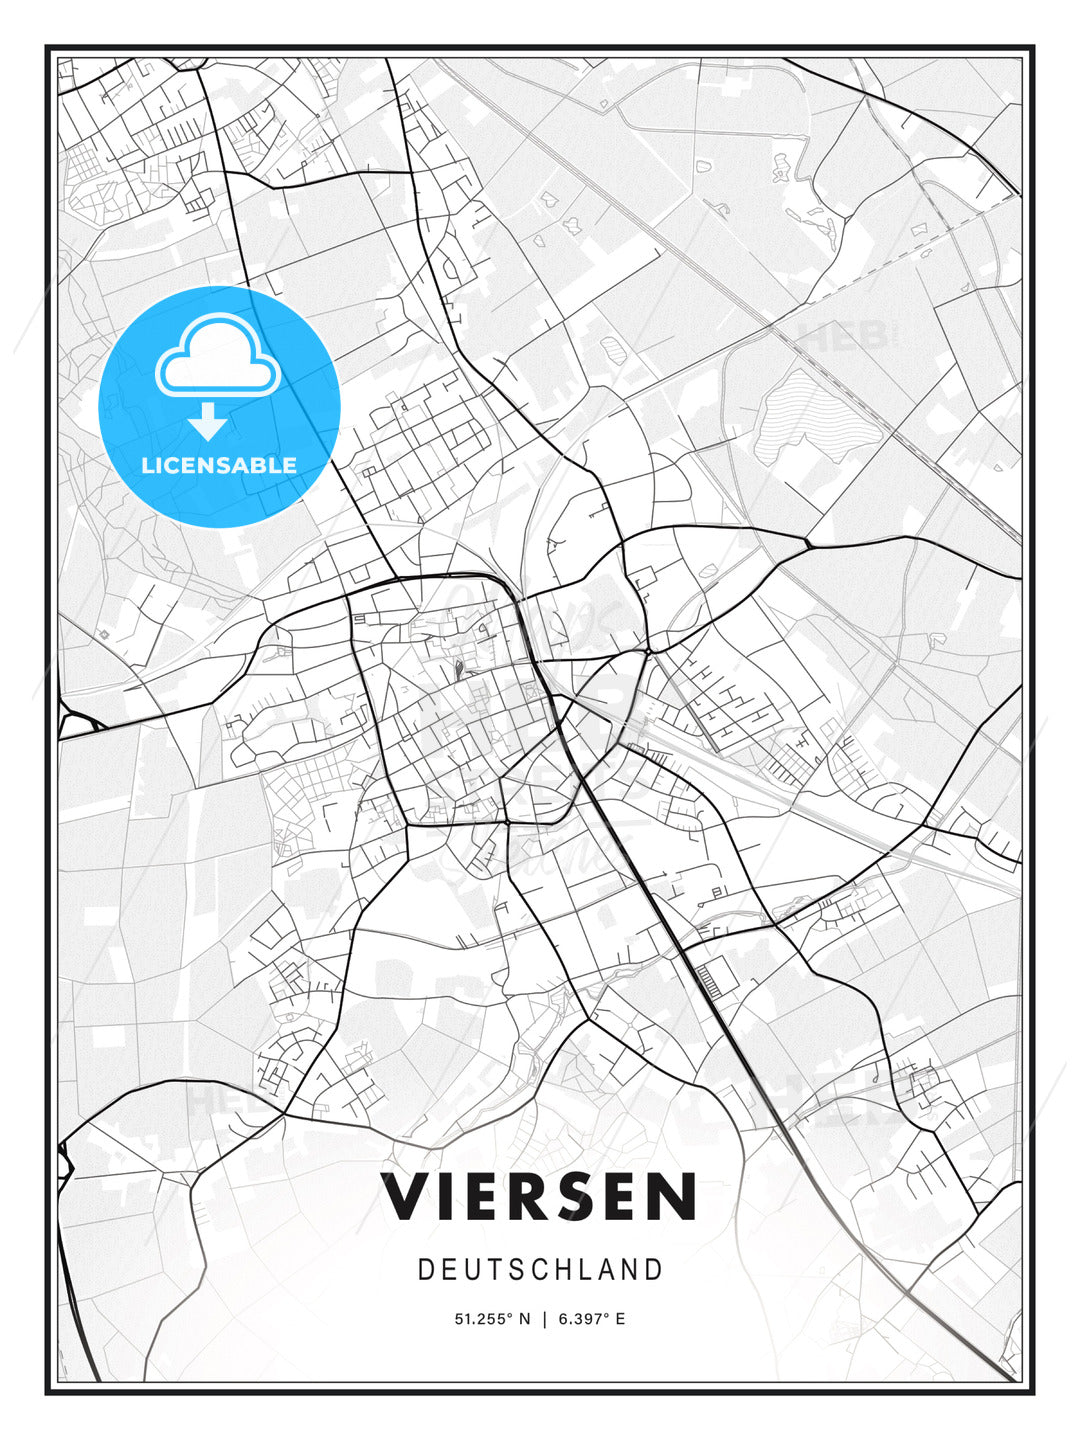 Viersen, Germany, Modern Print Template in Various Formats - HEBSTREITS Sketches